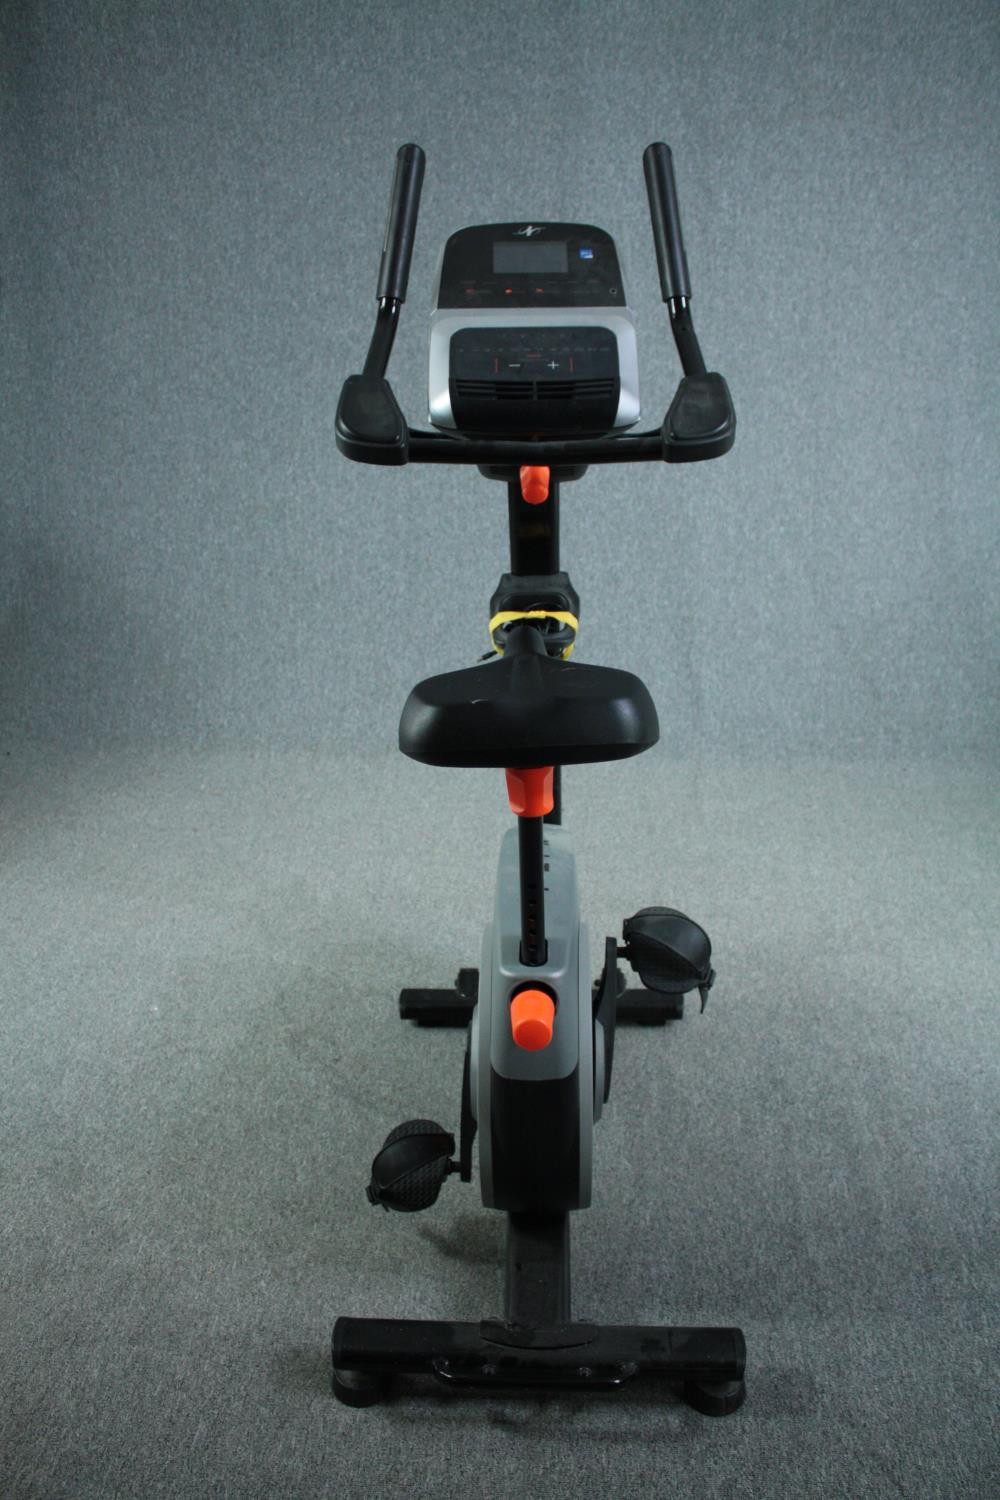 A contemporary NordicTrack exercise bike. H.160 W.110 D.31cm. - Image 4 of 7